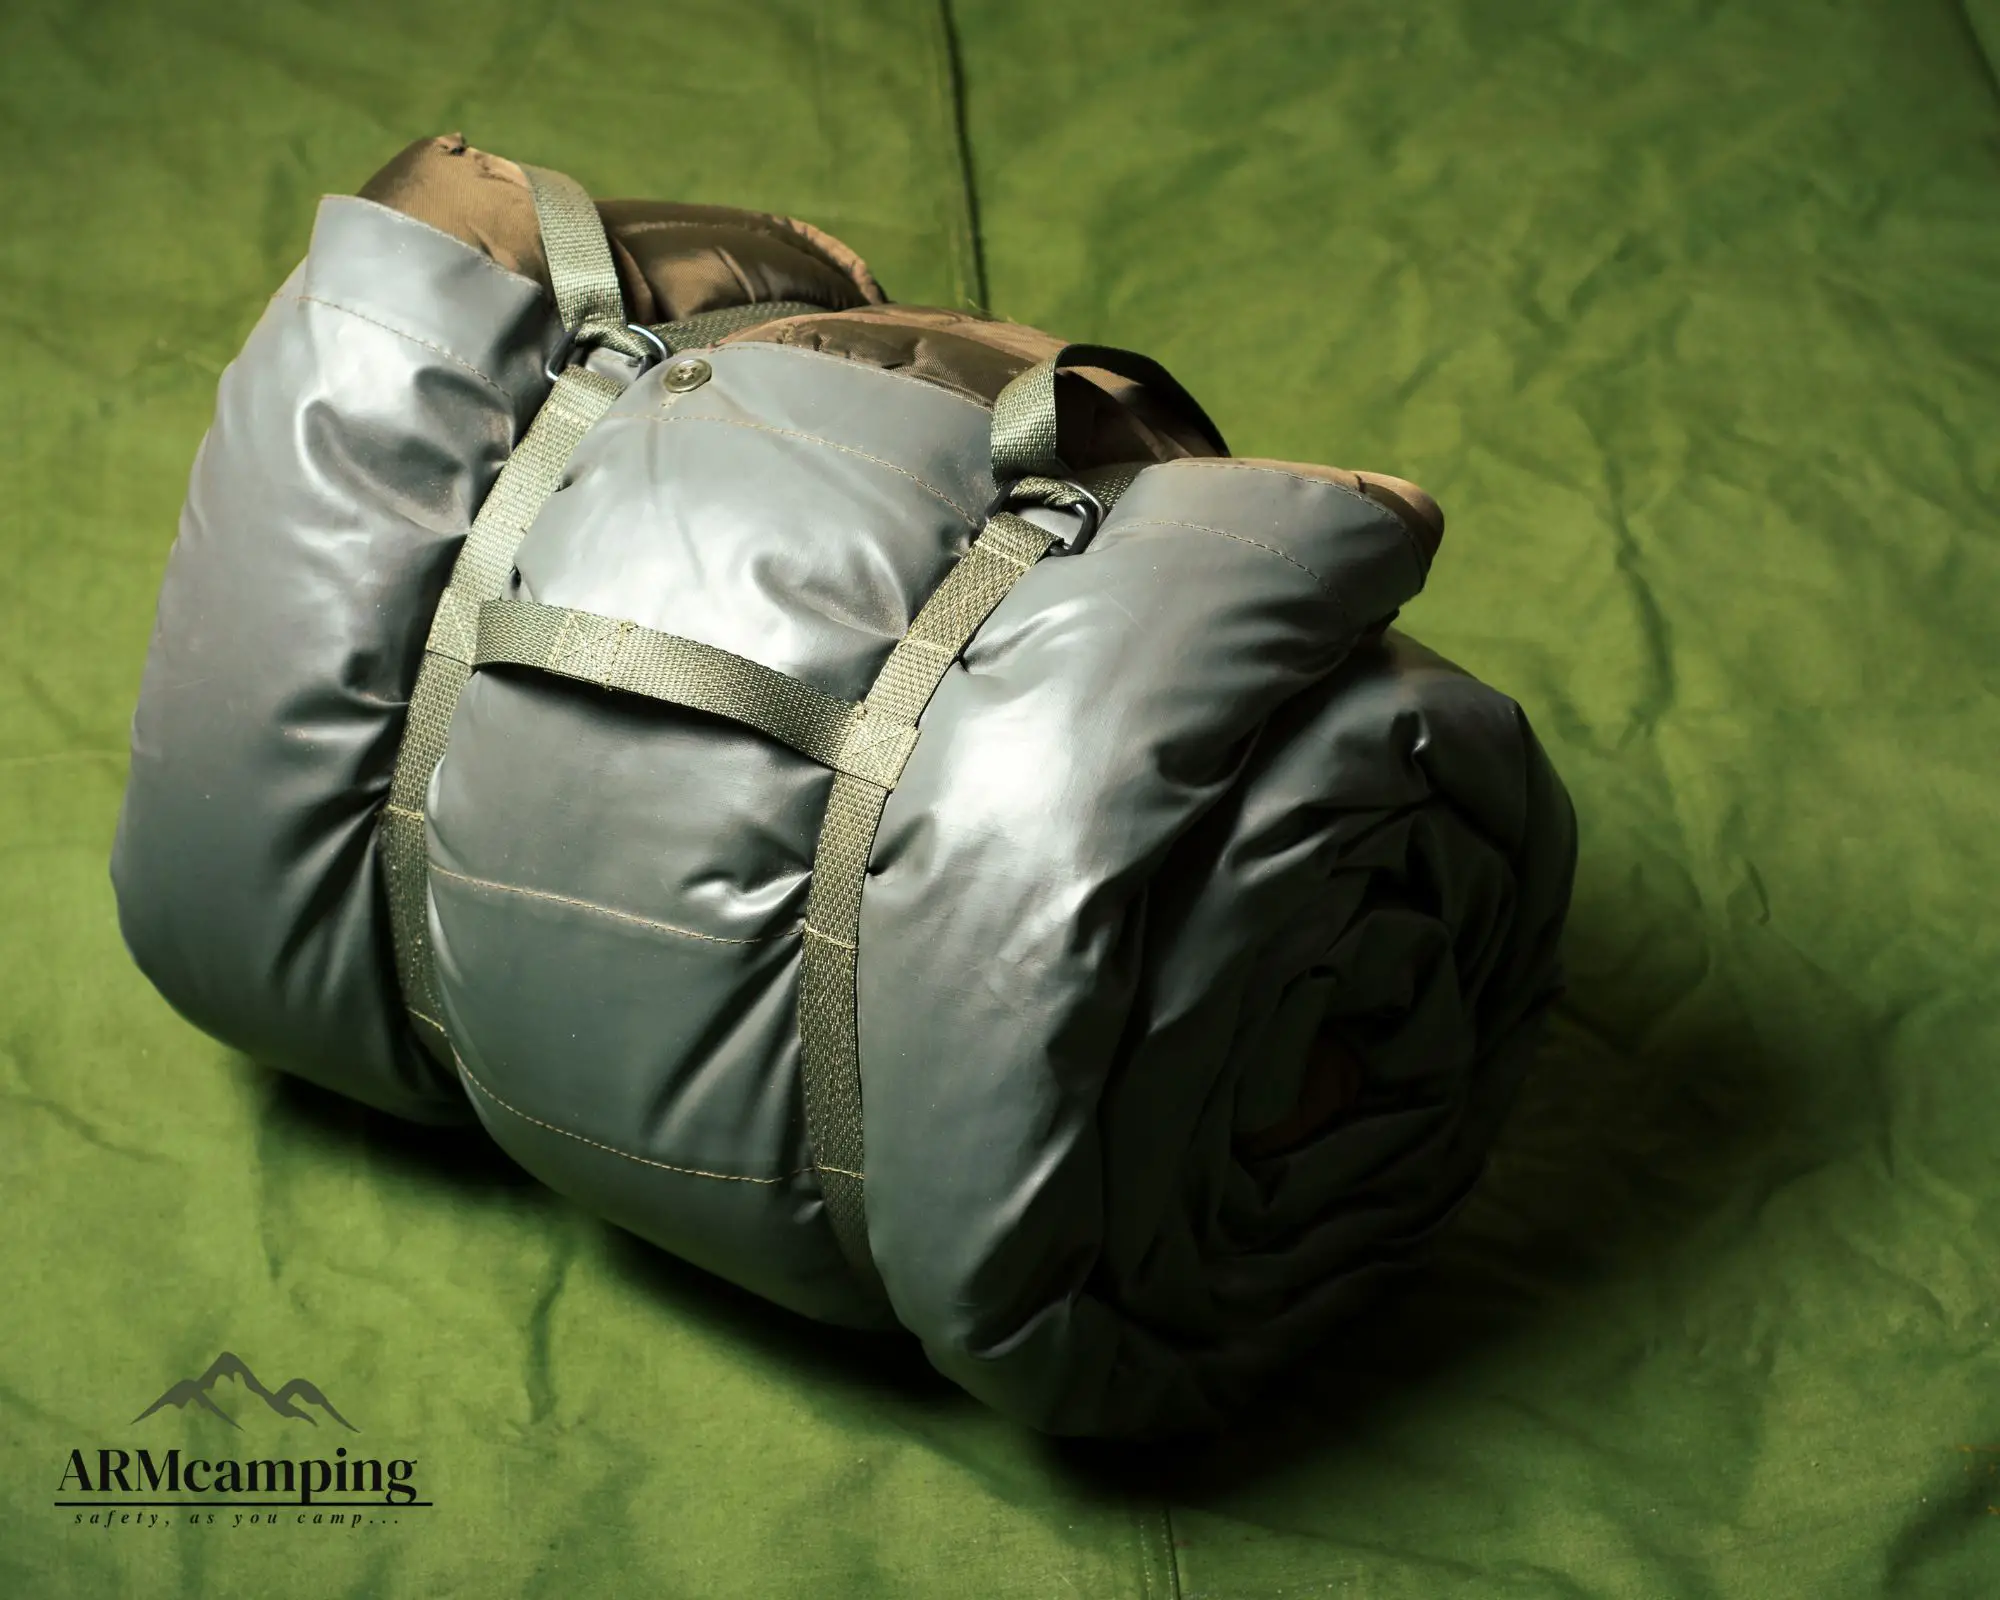 Can You Store Down Sleeping Bags Compressed?